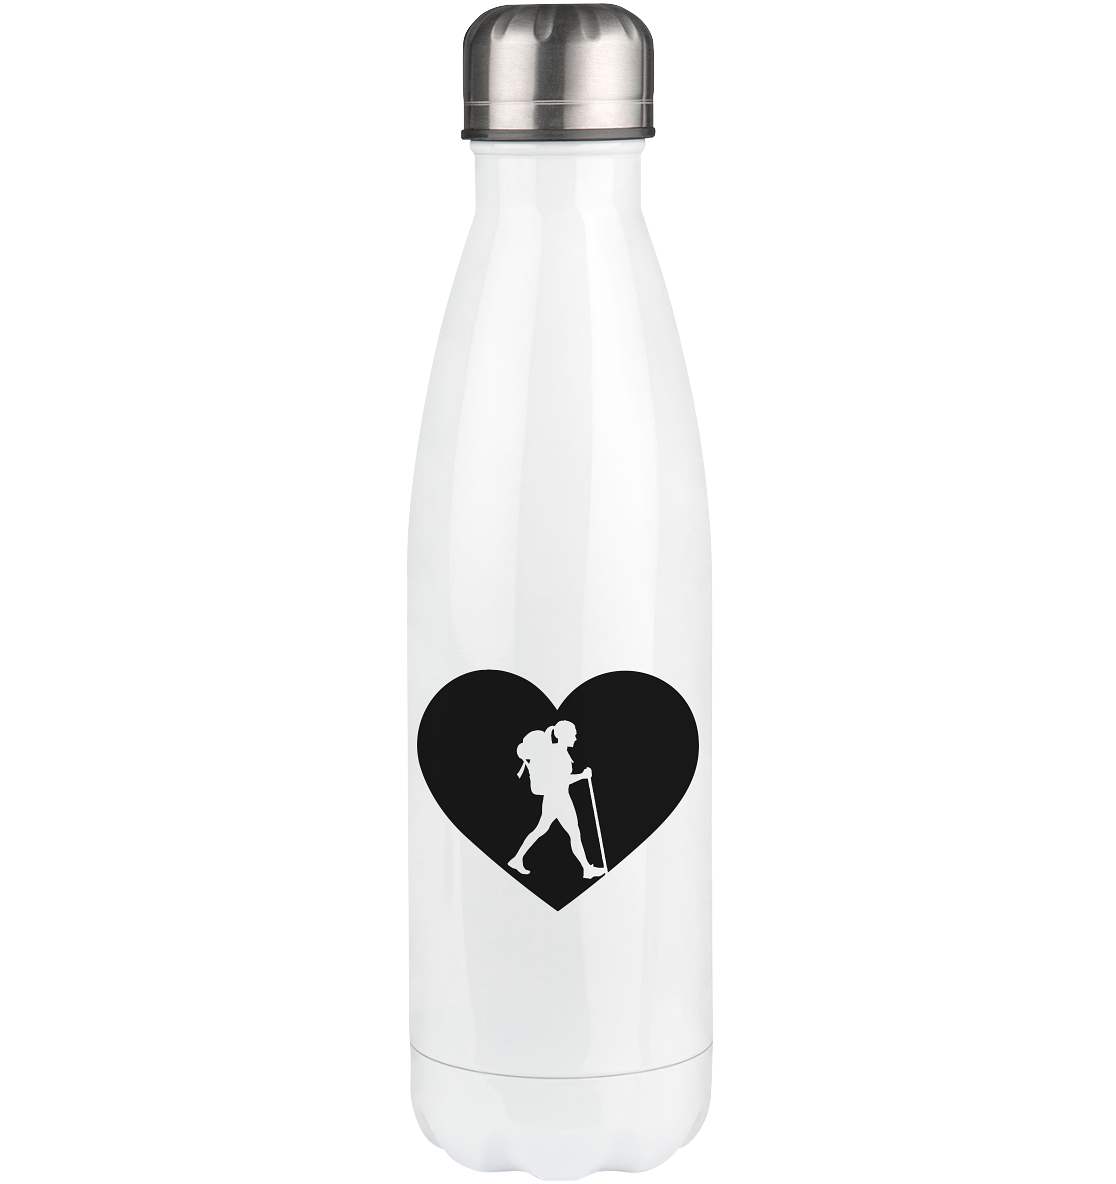 Heart 1 and Hiking - Edelstahl Thermosflasche wandern 500ml